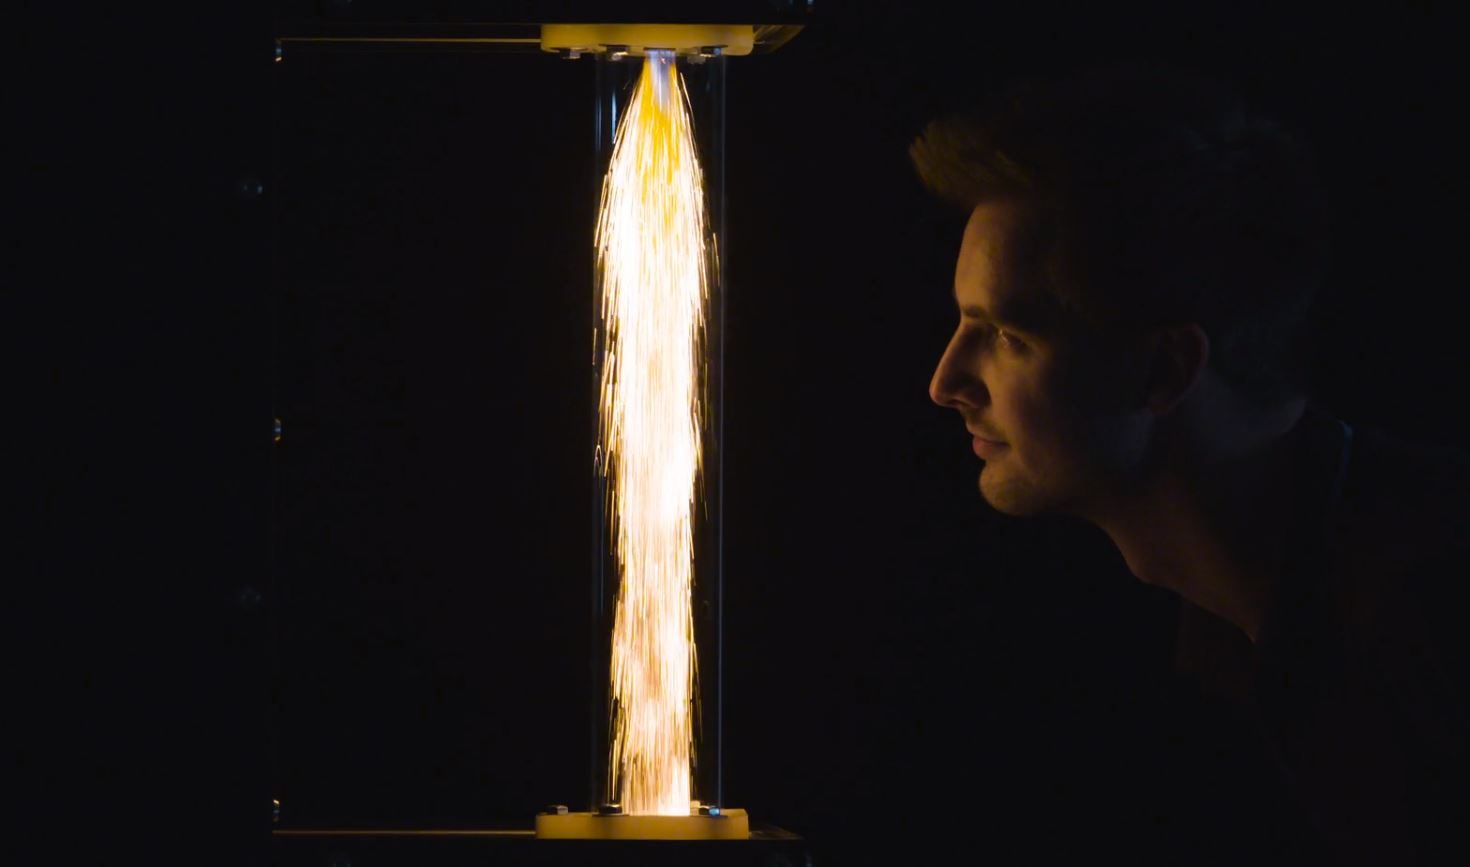 This image shows a man looking at the burning of metal powder for sustainable fuel for industries 